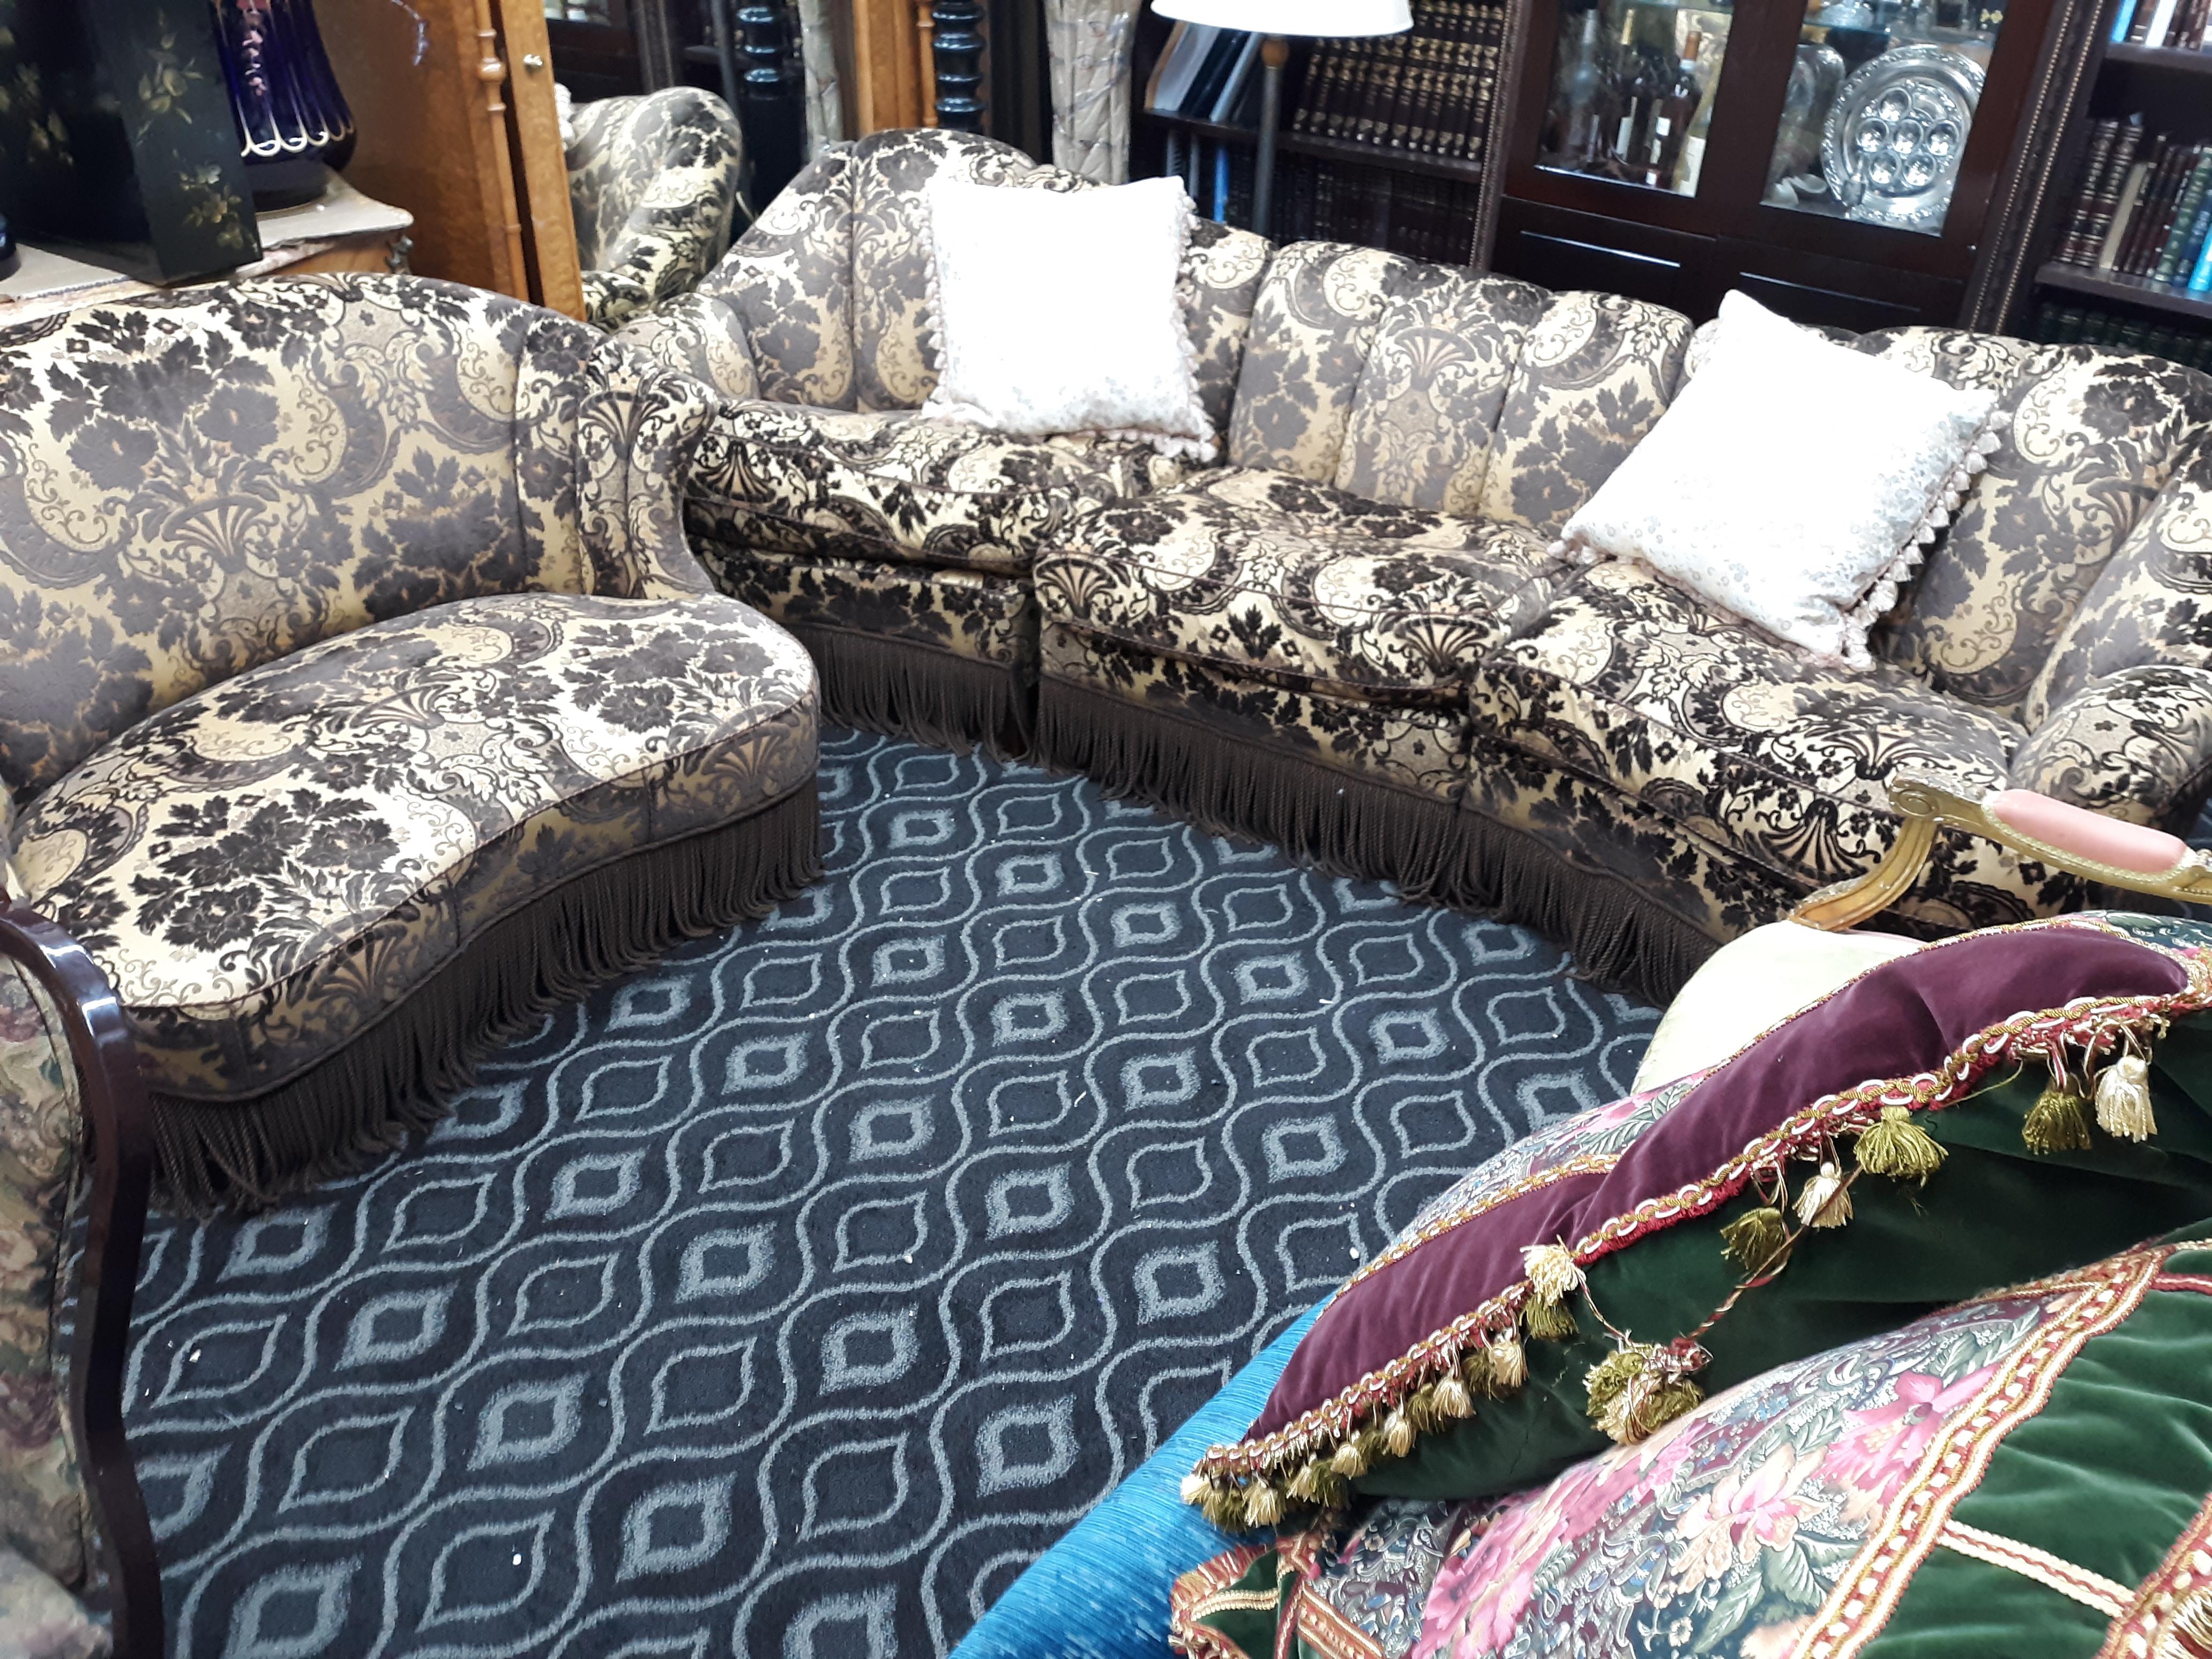 Louis XV style French Royalty couch set. This is a gorgeous velvet and cloth 3 piece couch and also comes with a matching loveseat (loveseat length 54 inches).

Without fail, people immediately ask about it. Pictures absolutely cannot do justice,